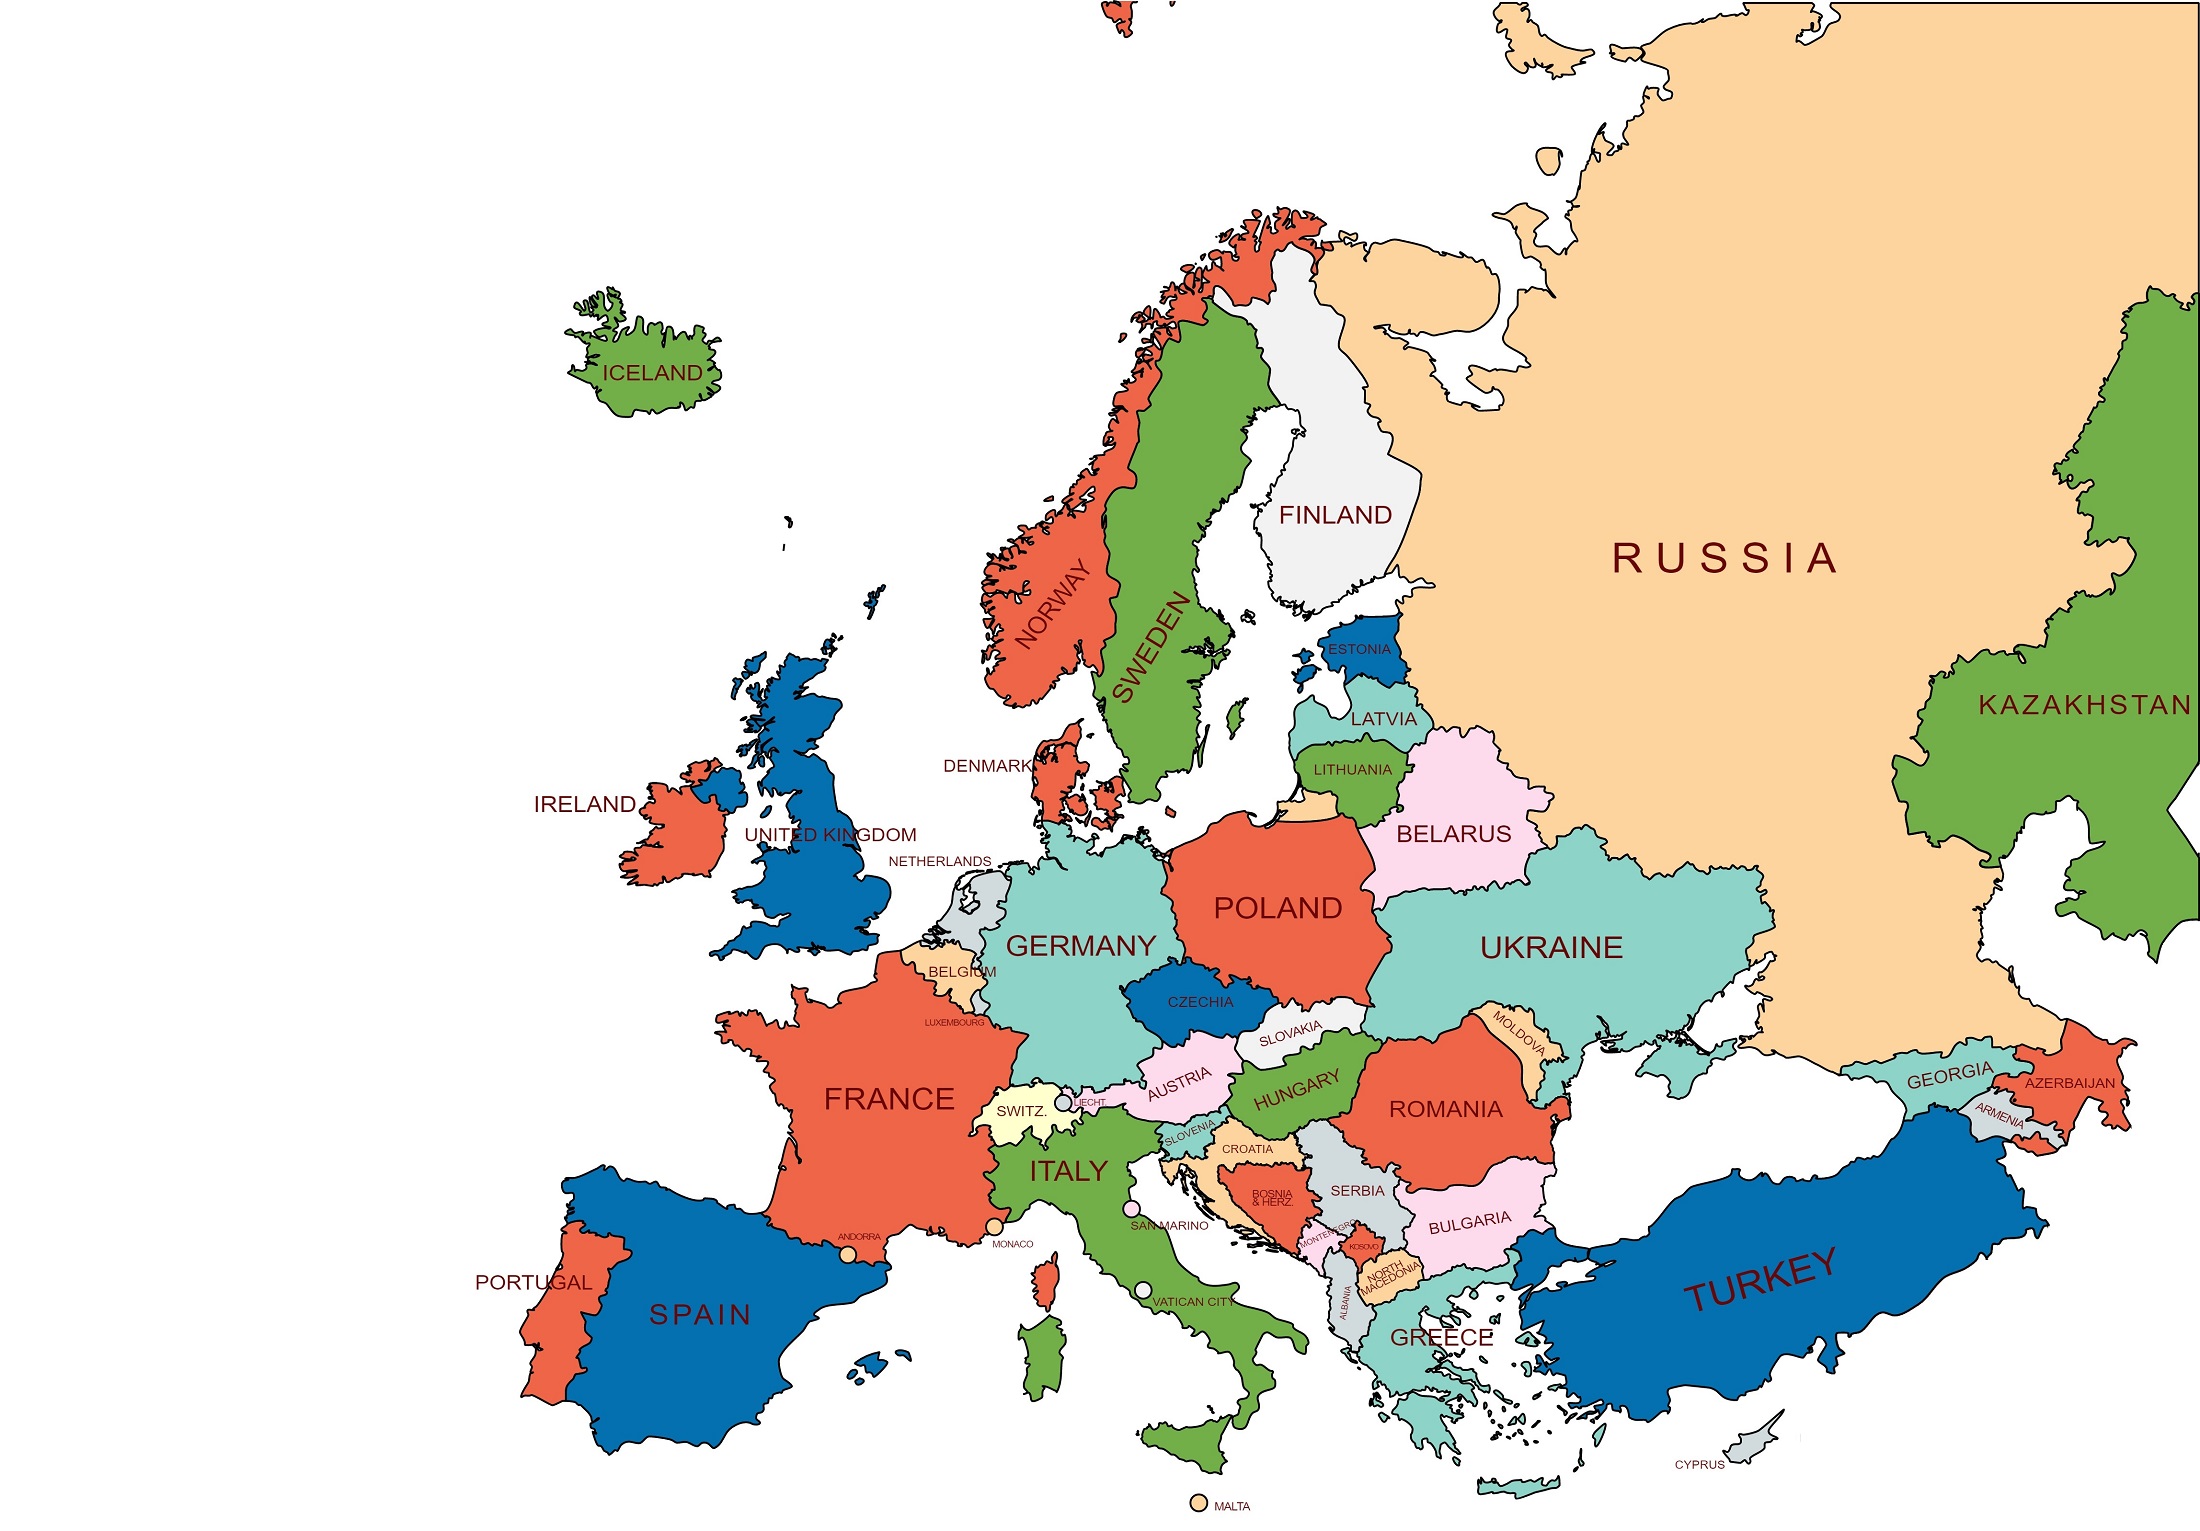 list of europe countries and capitals